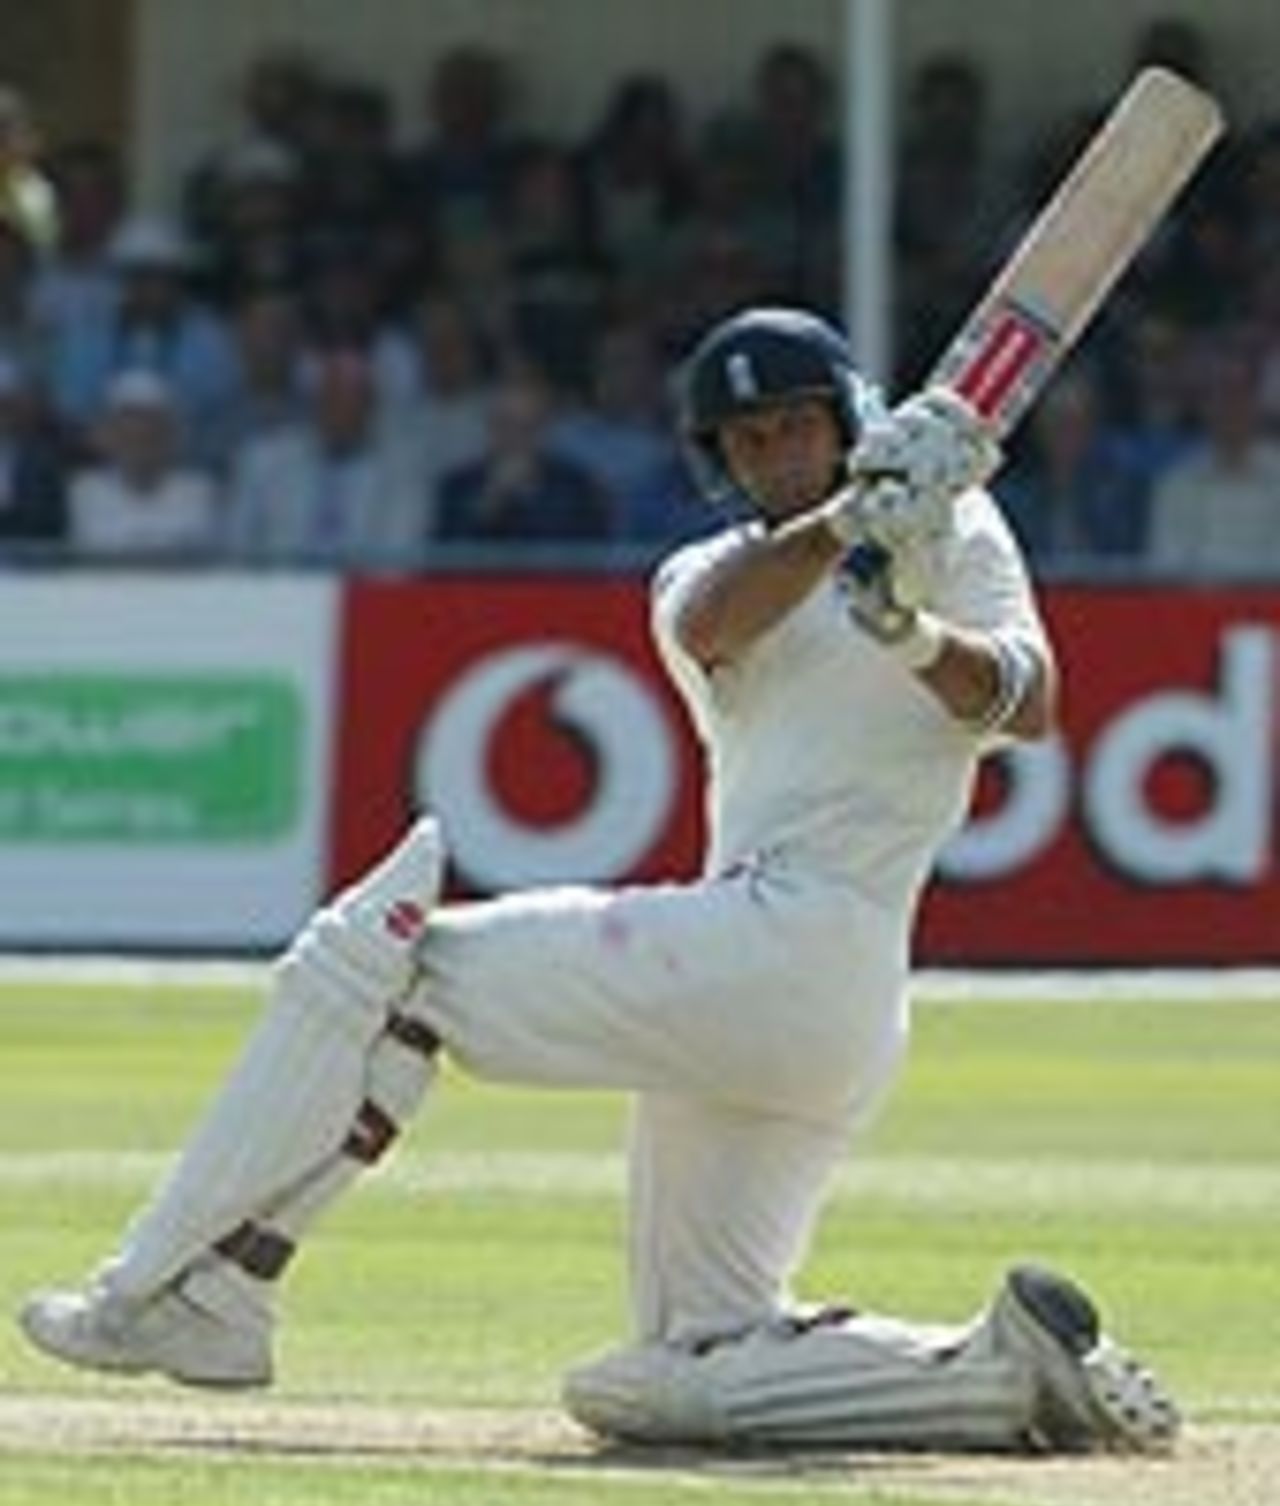 Nasser Hussain sweeps on the way to his hundred against South Africa at Trent Bridge